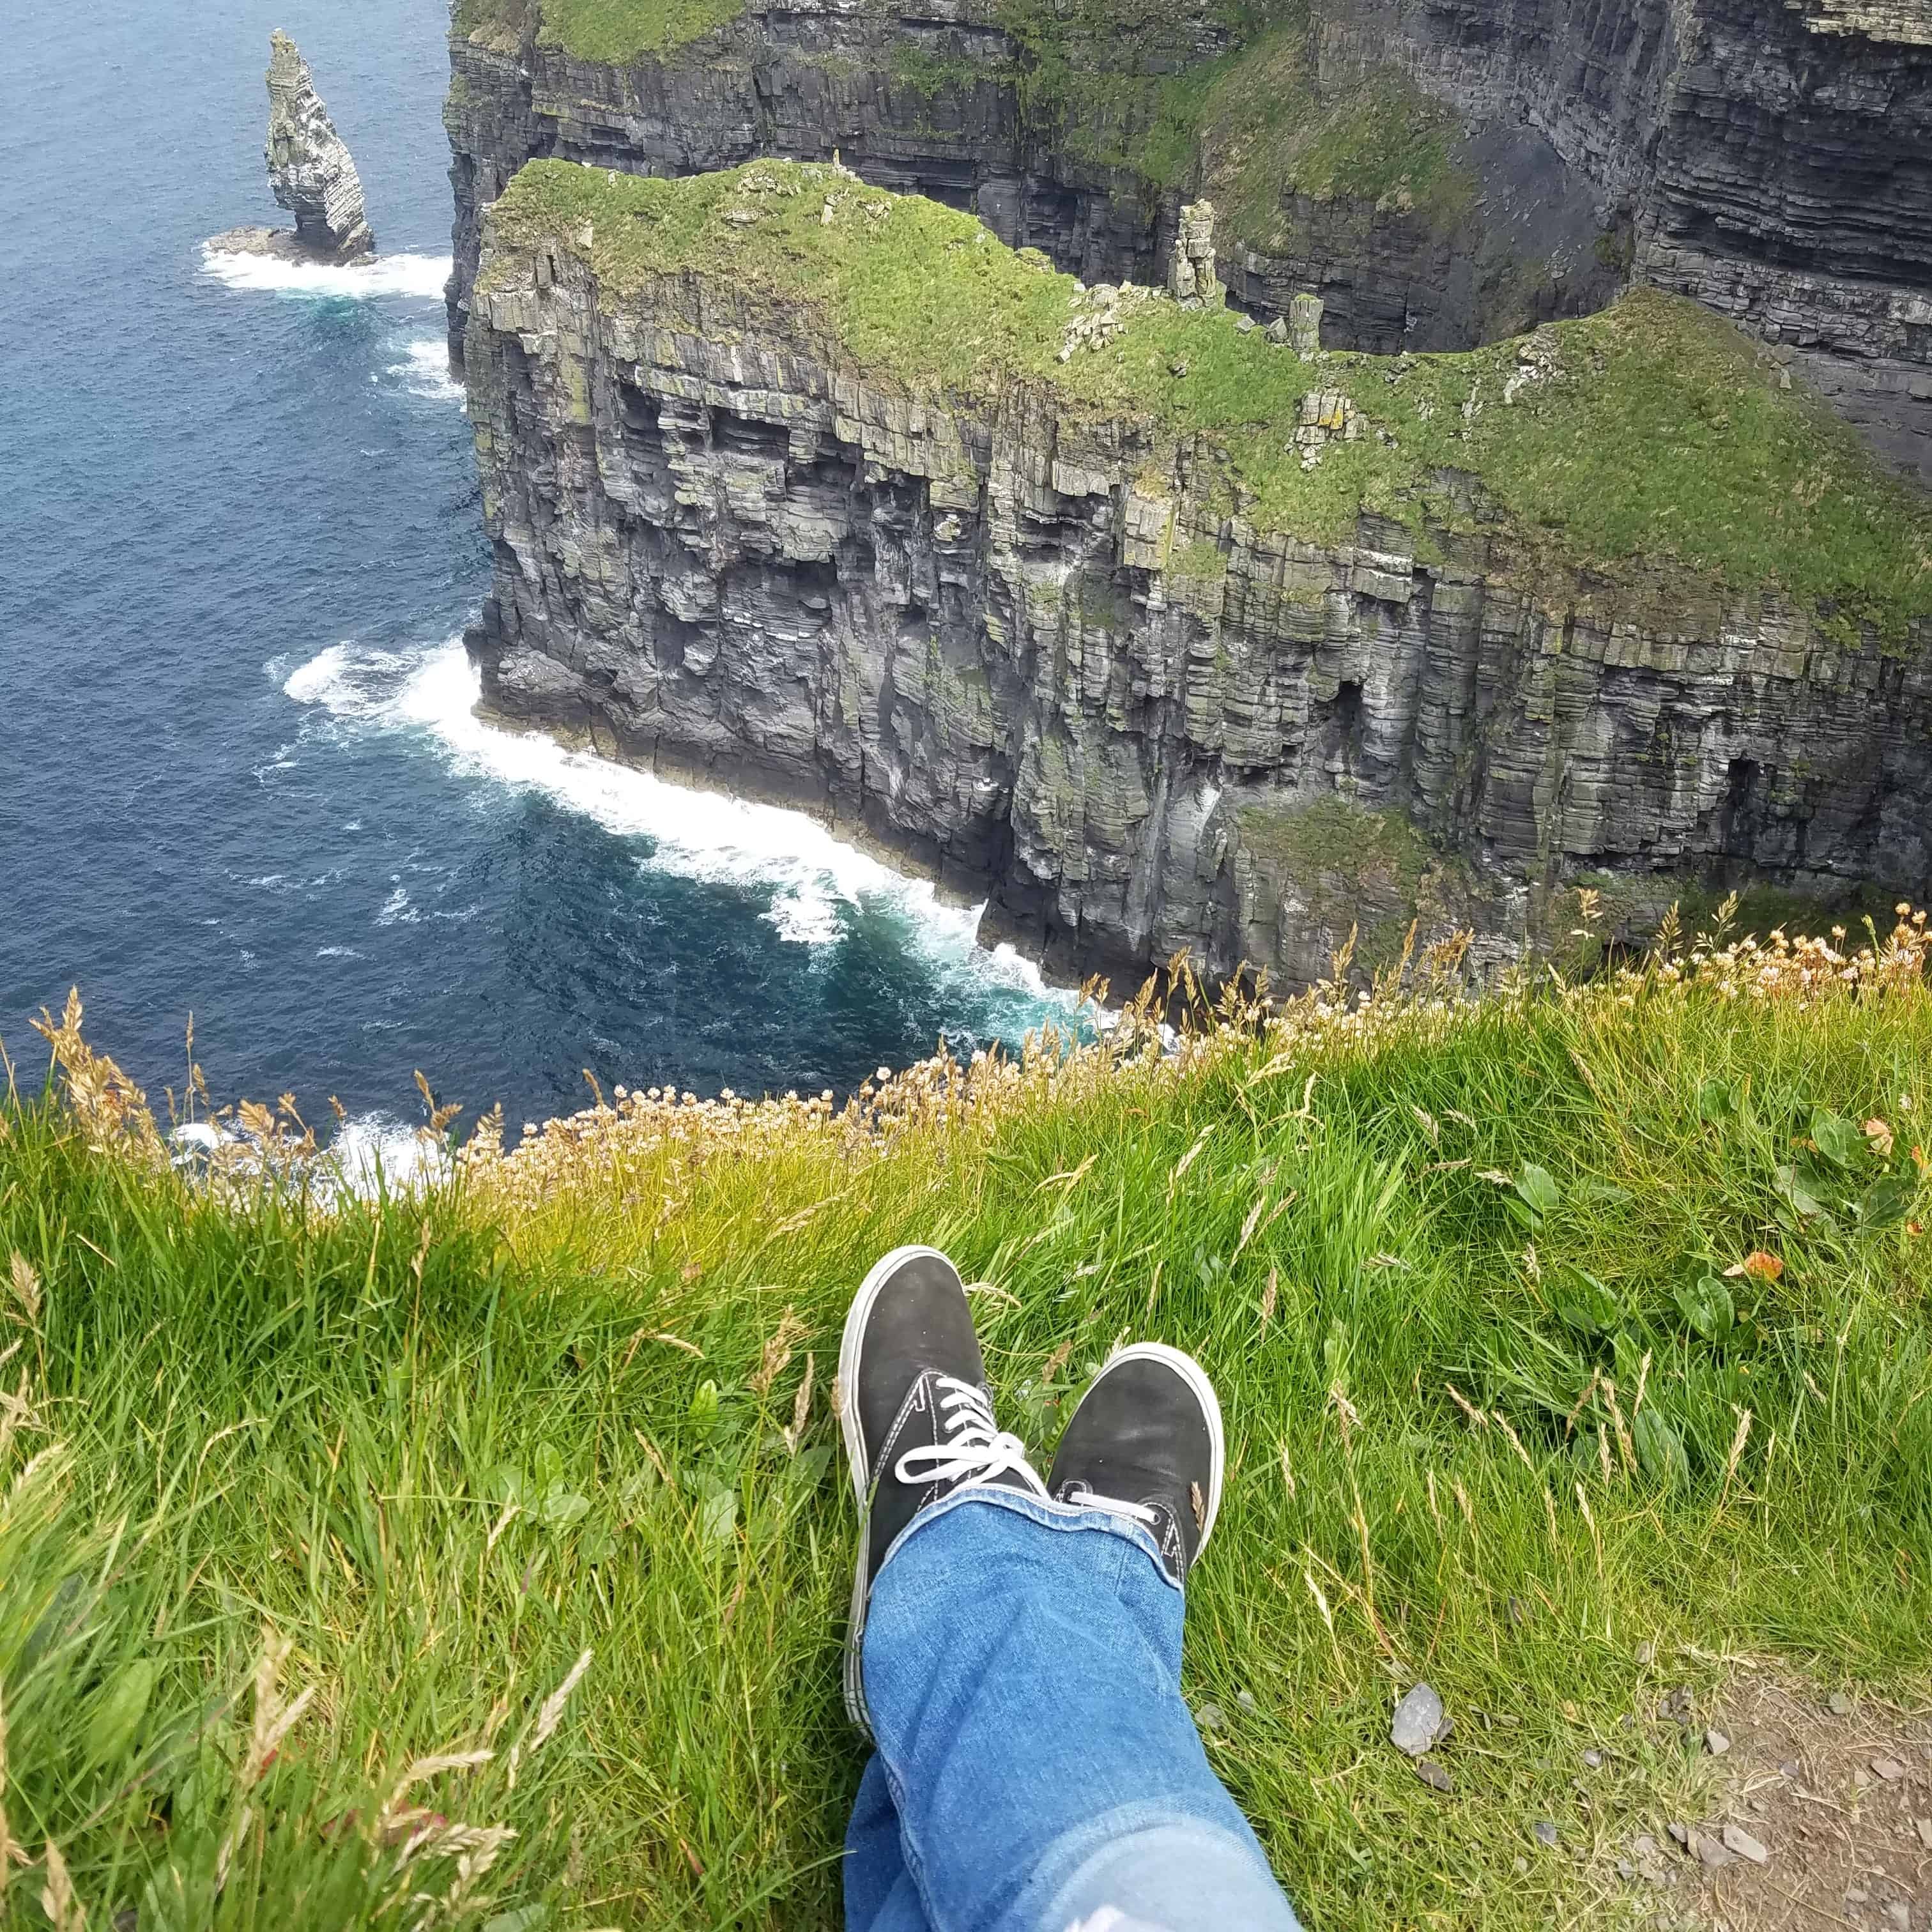 Legs wearing a beat up pair of vans and ripped jeans dangle over the edge of a cliff overlooking the ocean.